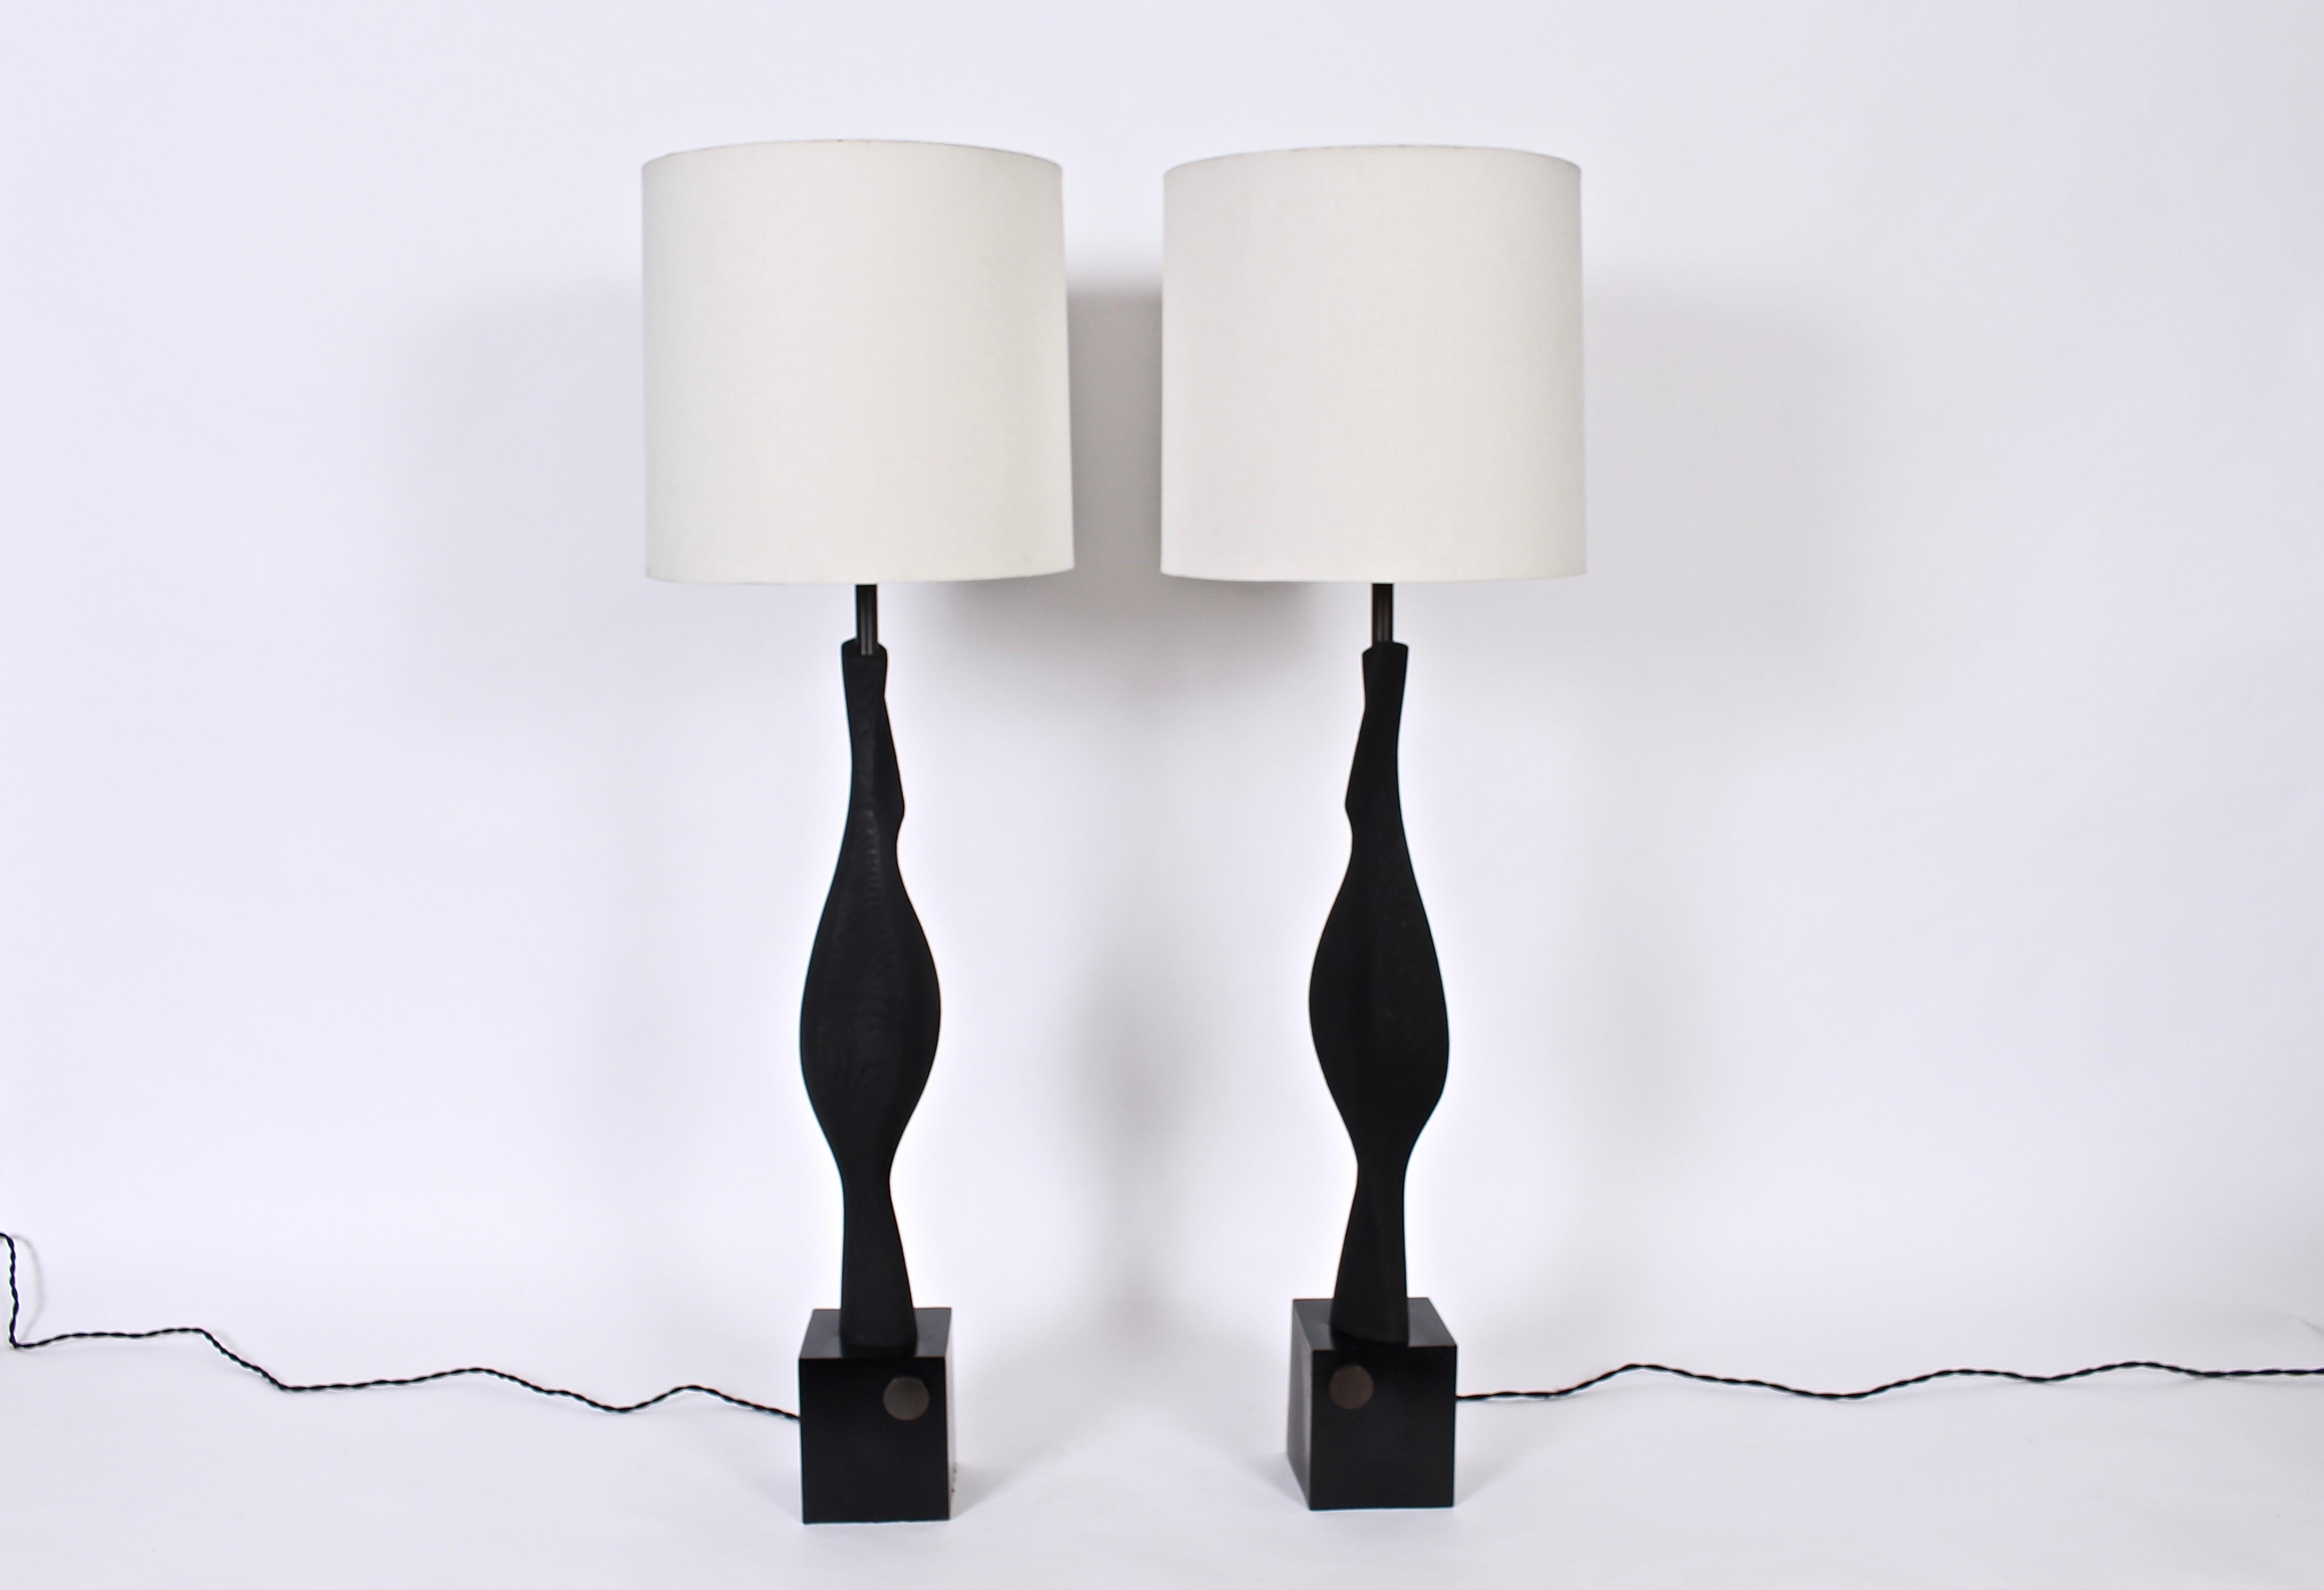 Statuesque pair of tall black grained wood Laurel Lamp Company table lamps, 1960s. Featuring a handcrafted, biomorphic black ebonized grained wood form on rectangular Black enameled metal platform base. With patinated brass disc light switch to